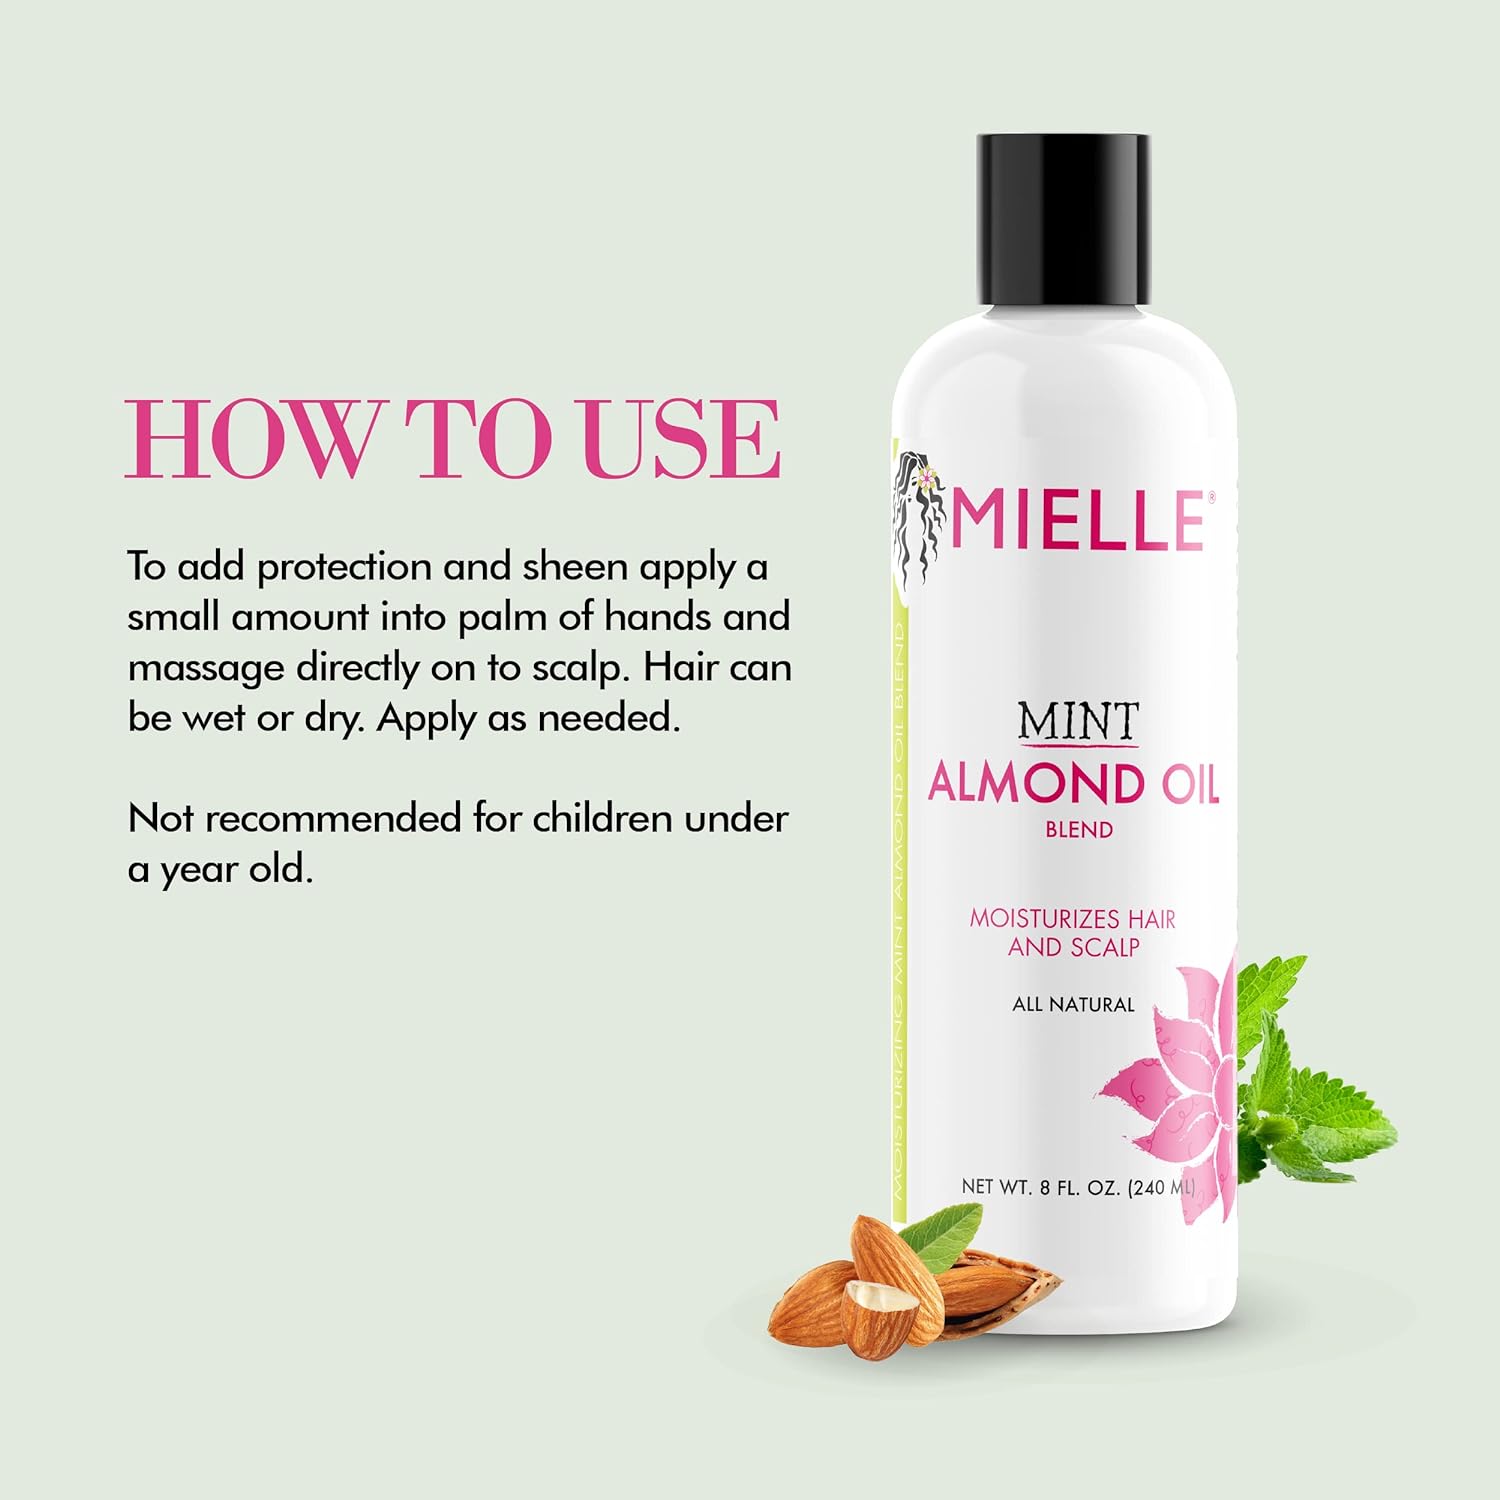 Mielle Organics Mint Almond Oil for Healthy Hair and Scalp - All Natural, 8 Oz